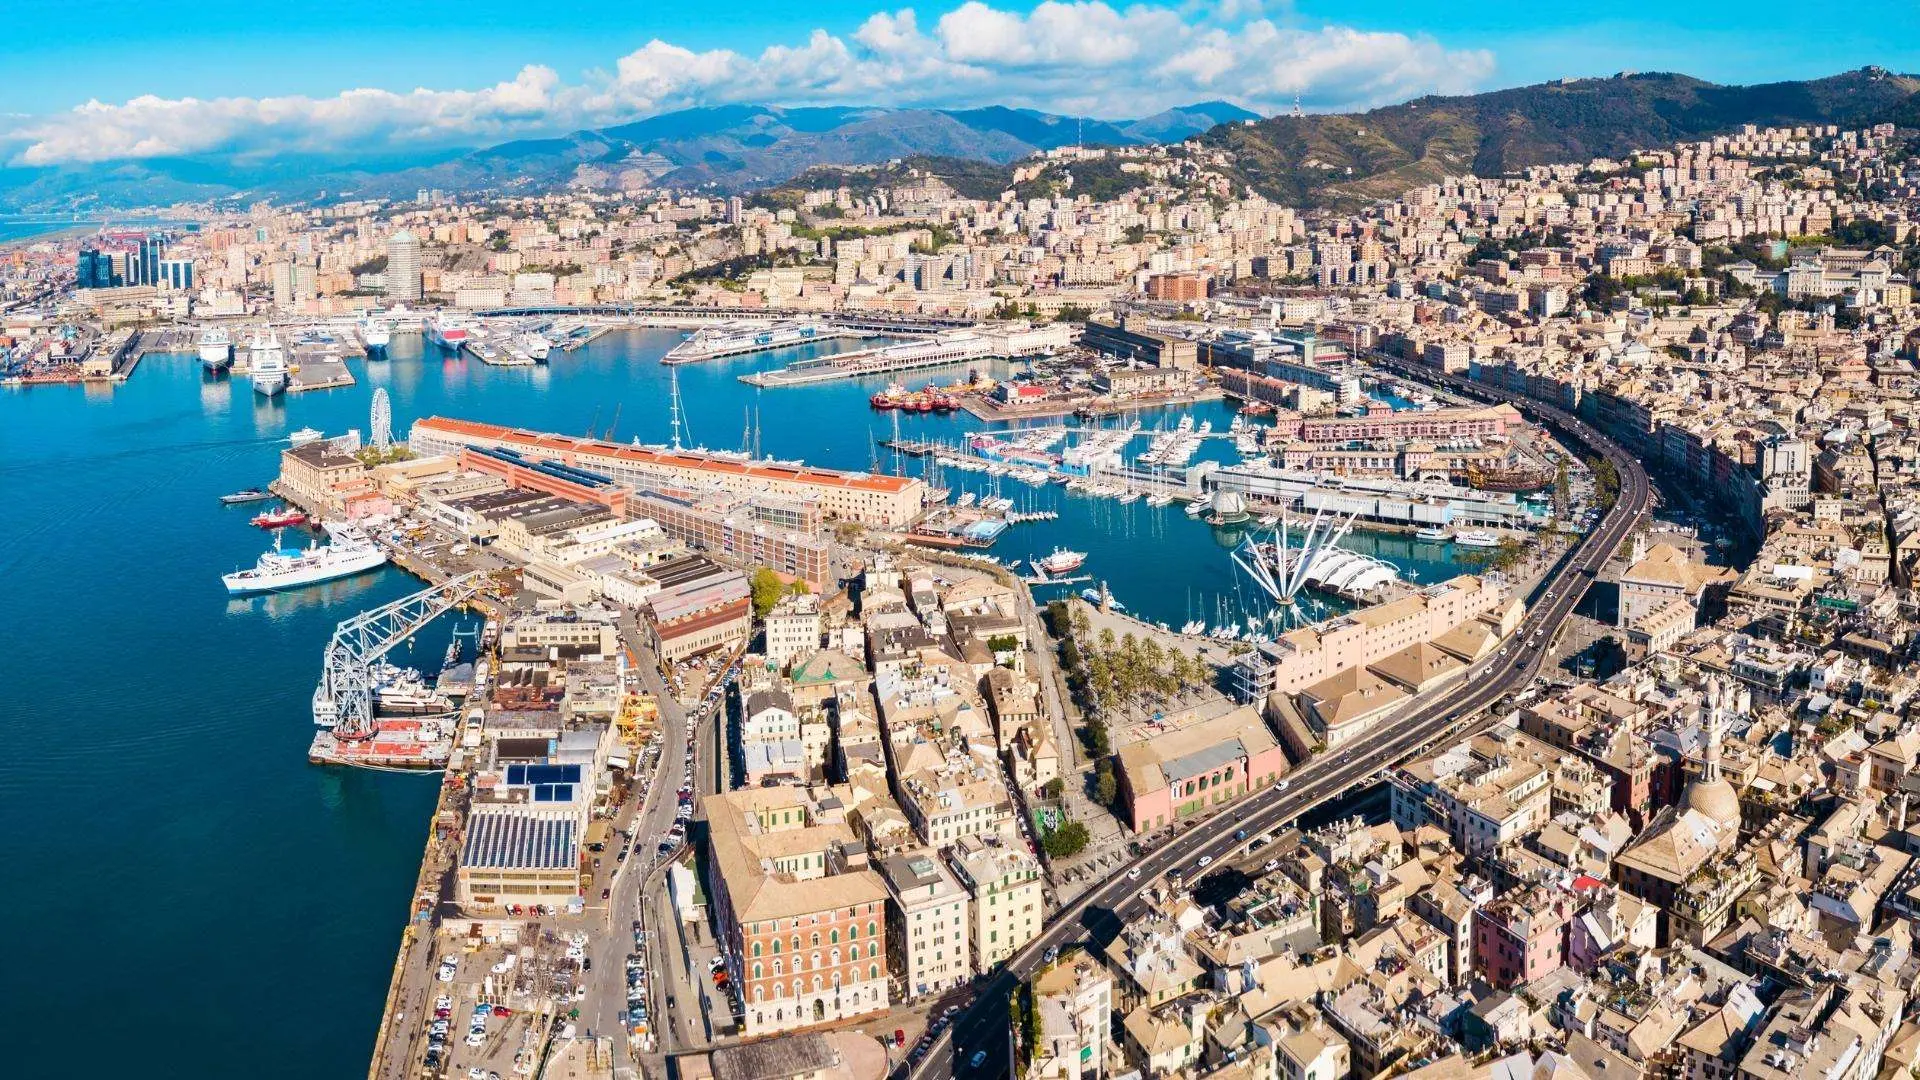 Sleeping in Genoa: recommended areas and the best hotels